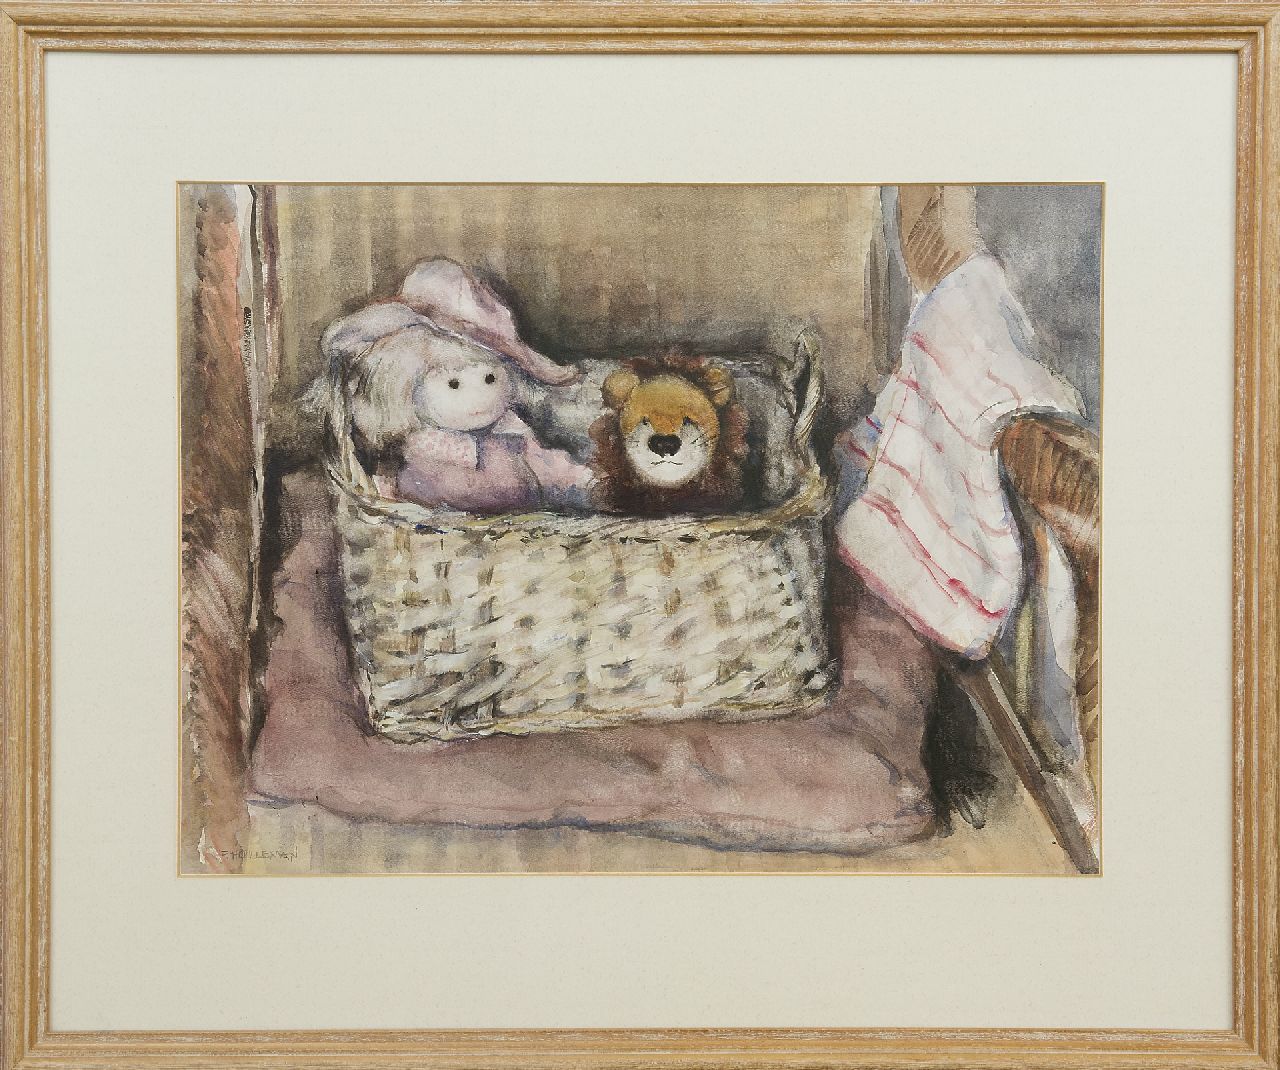 Holleman F.  | Frida Holleman | Watercolours and drawings offered for sale | The doll basket, watercolour on paper 35.5 x 47.0 cm, signed l.l.